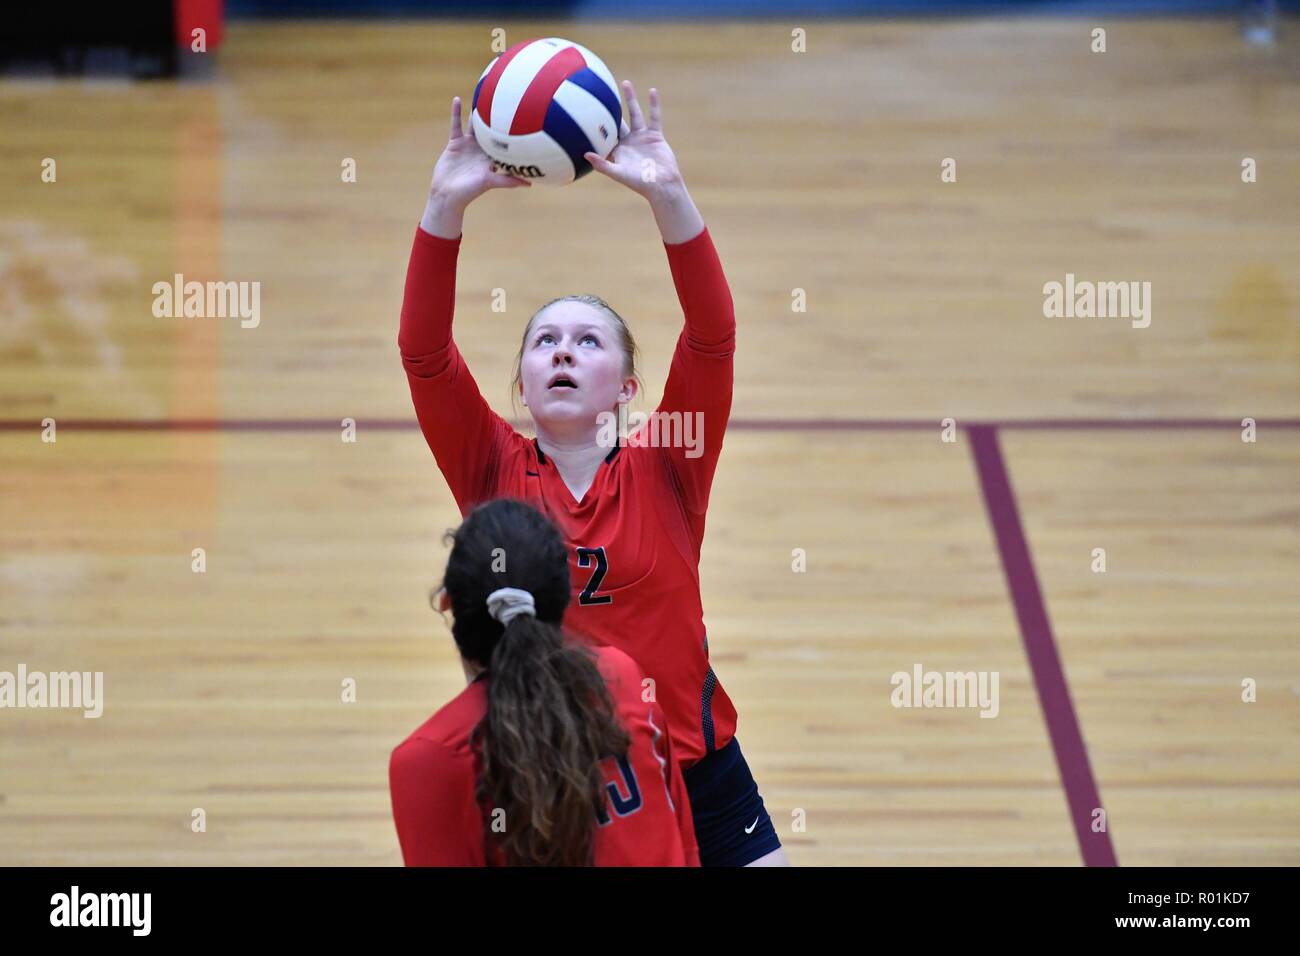 Player setting for a teammate during a high school match. USA. Stock Photo